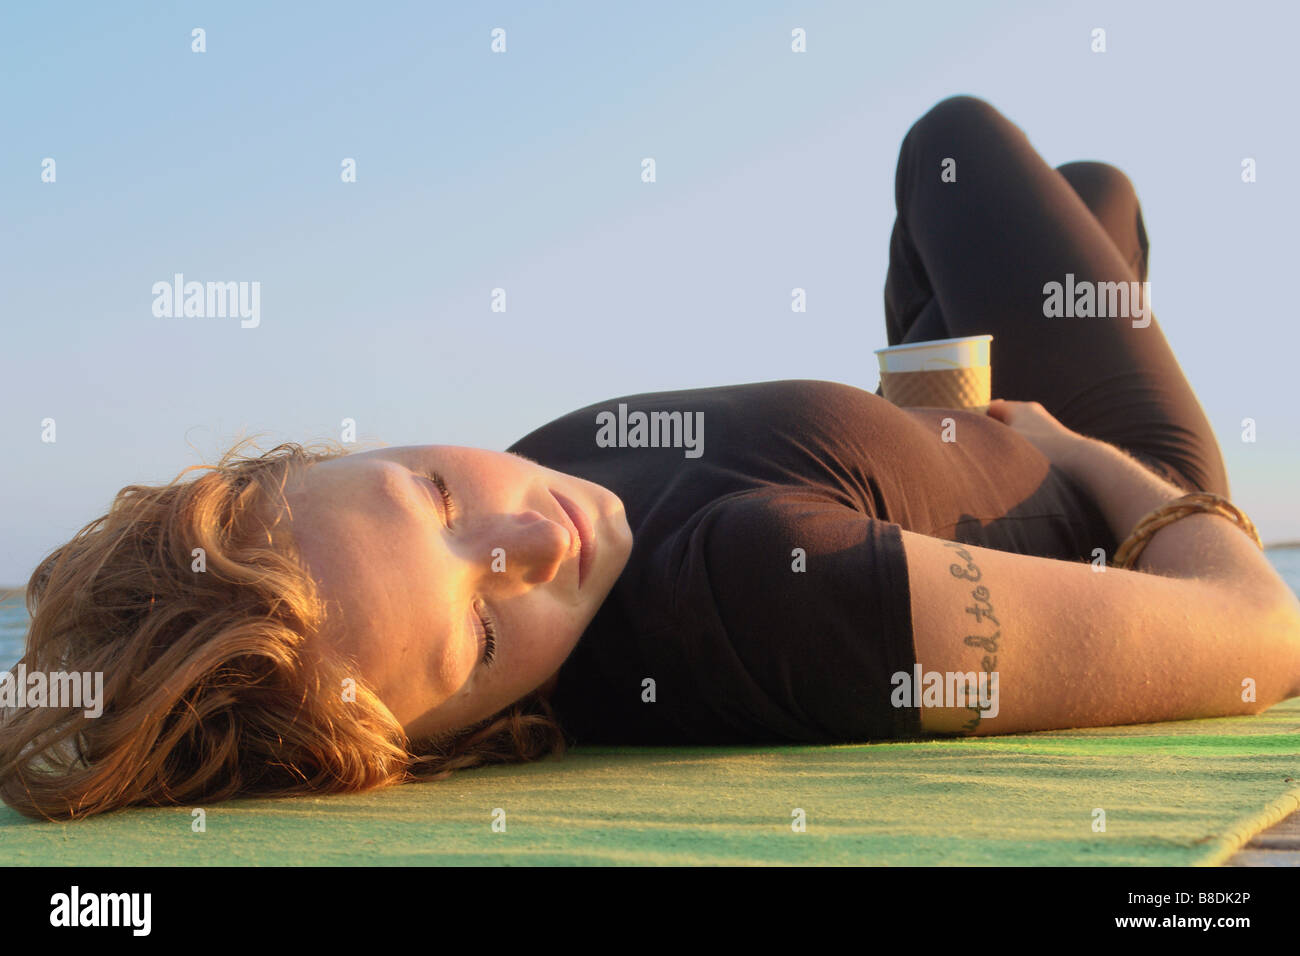 Woman lying on dock by lake, Clear Lake, Riding Mountain National Park, Manitoba, Canada Stock Photo